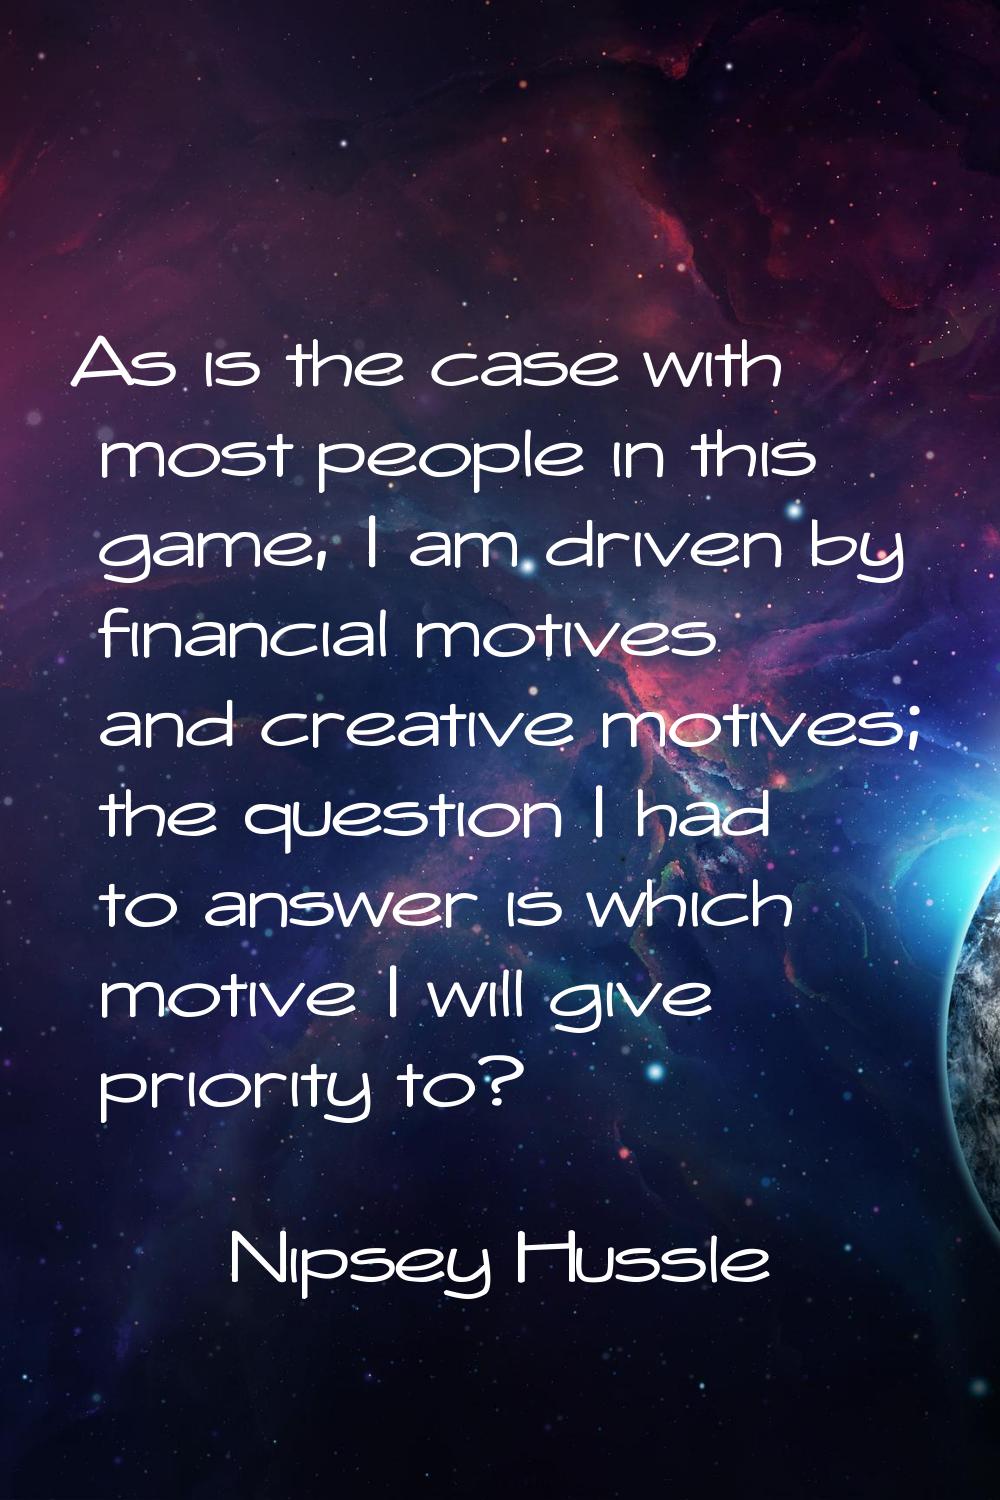 As is the case with most people in this game, I am driven by financial motives and creative motives